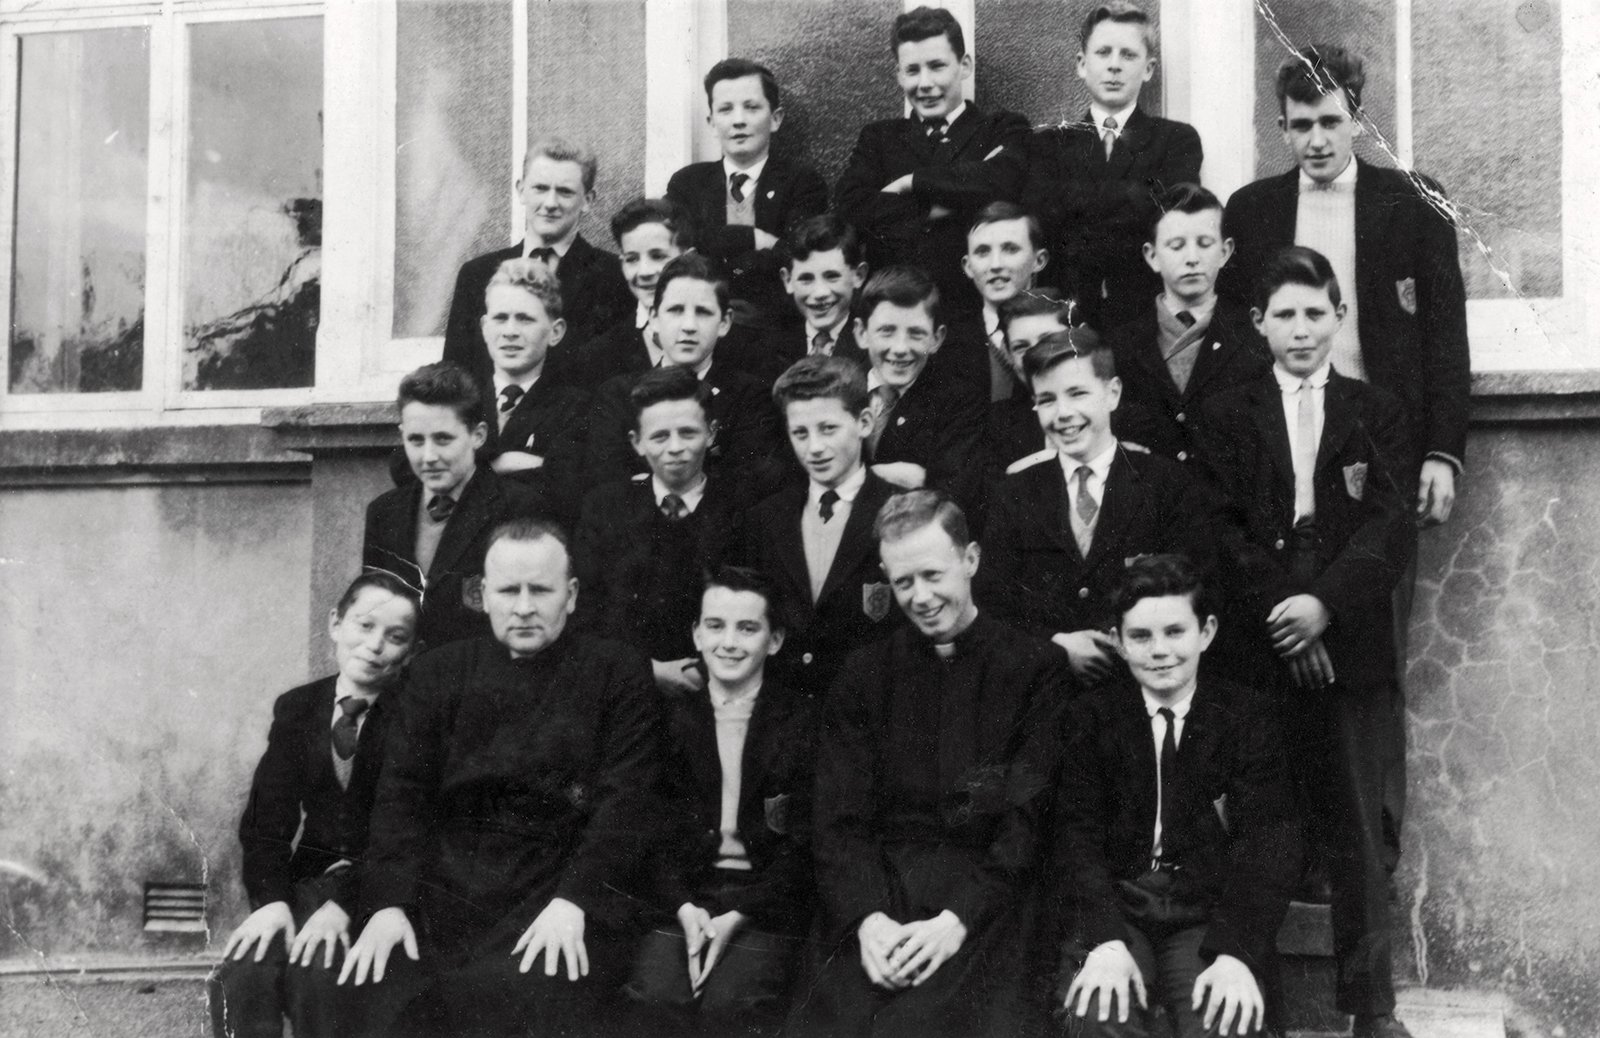 Group of students at Sacred Heart College in Cork city, the boarding school attended by Mike Dwyer (second from right, back row), c. 1960s.